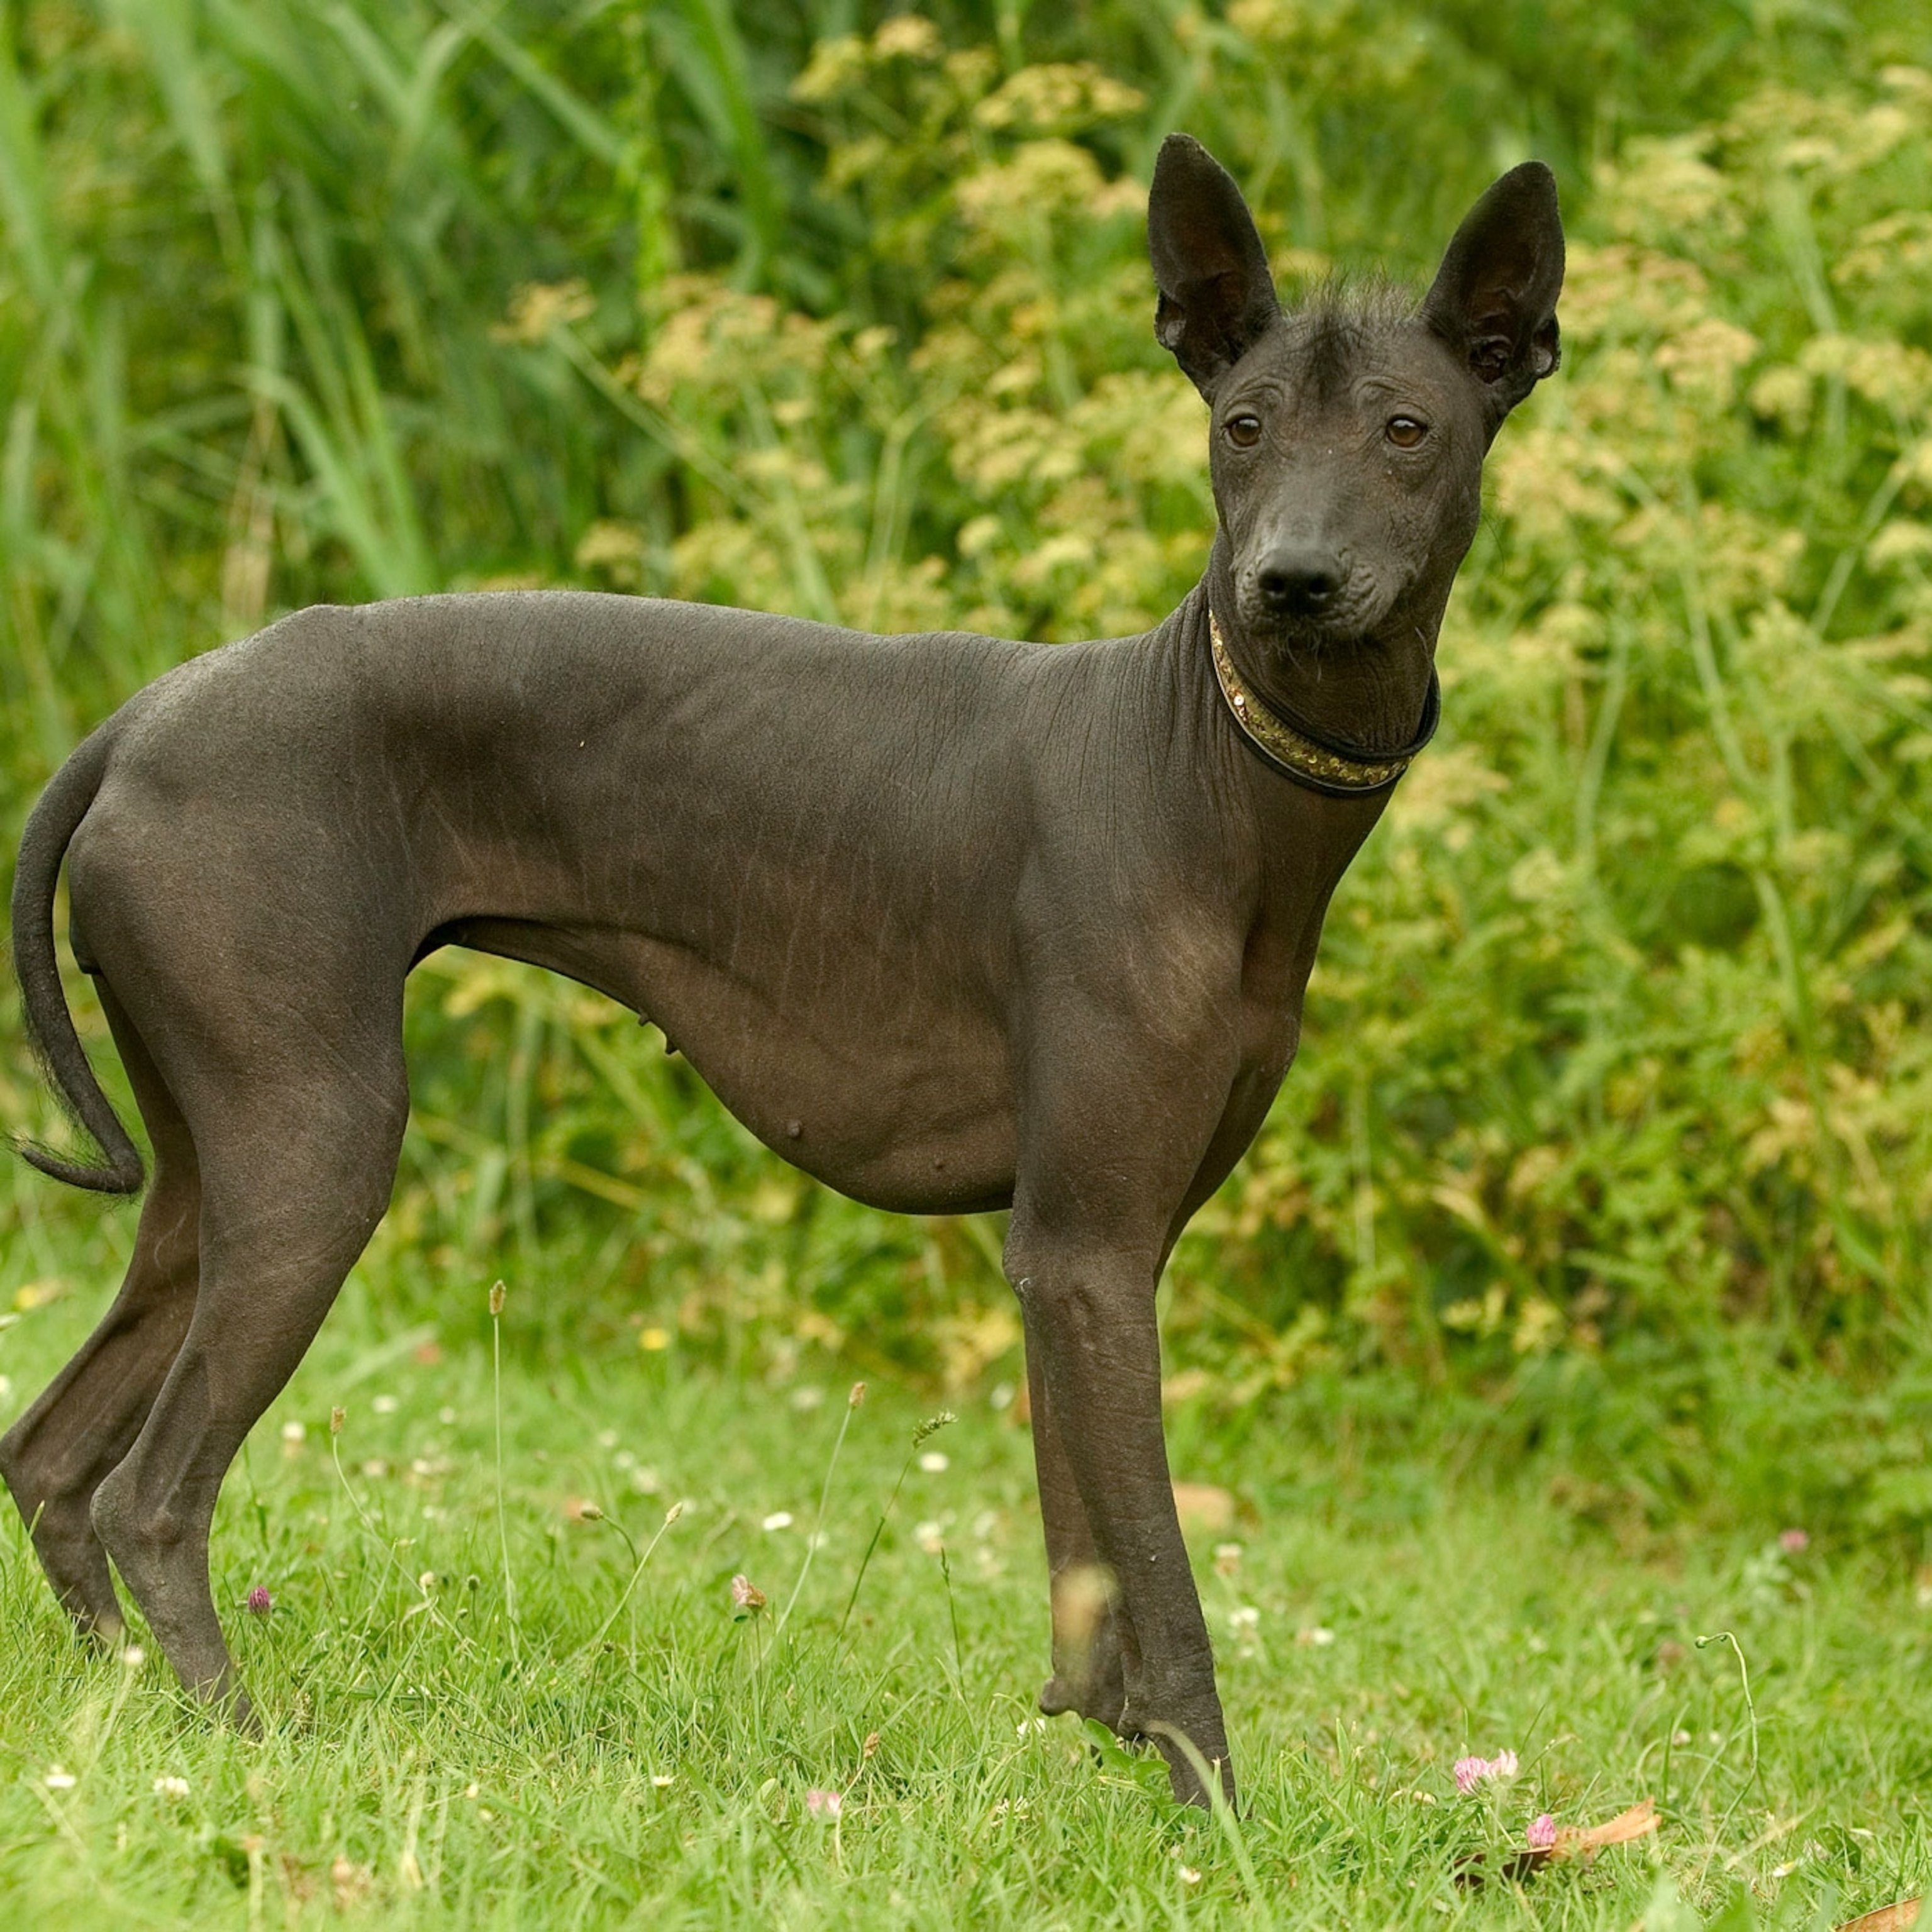 What is the purpose of Xoloitzcuintli?